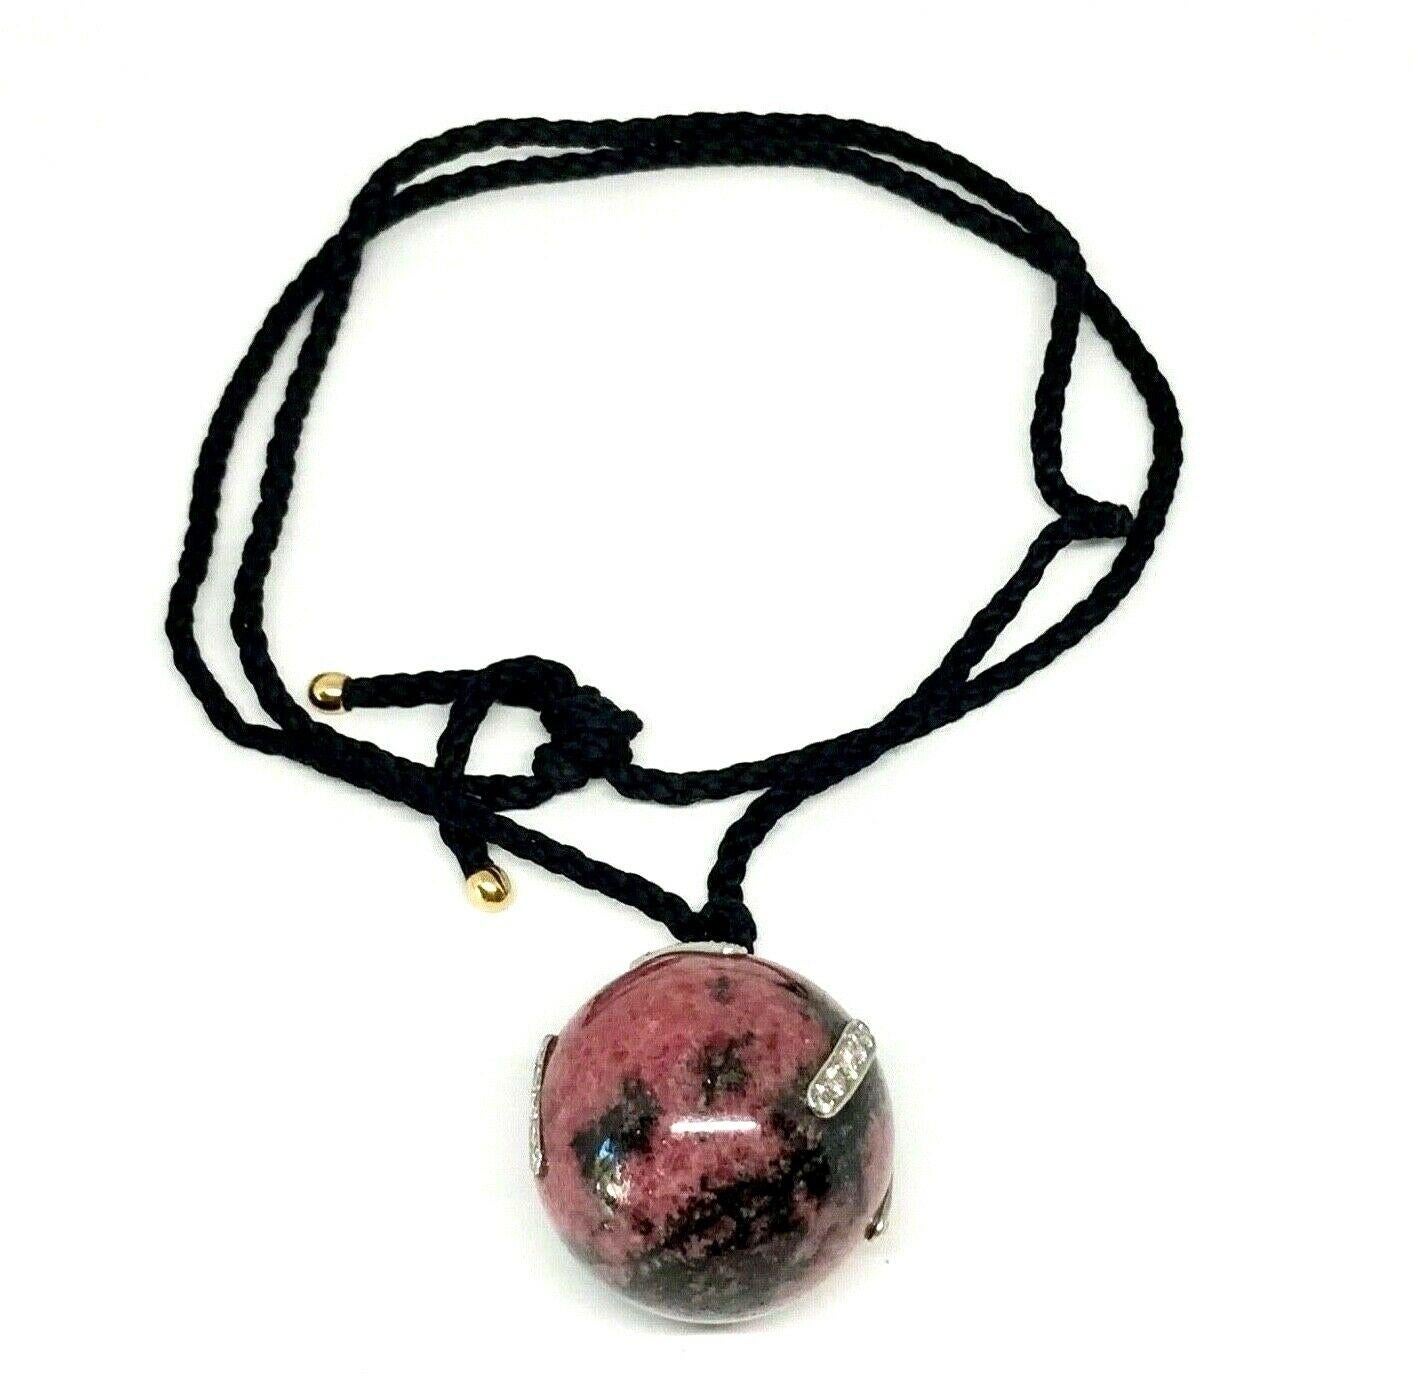 Rare pendant necklace by Paloma Picasso for Tiffany & Co. Features a rhodonite sphere pendant incrusted with diamonds set in white gold frames. About 2 cts of round brilliant cut diamonds, G color, VS1 clarity. The pendant hangs on a nylon cord with